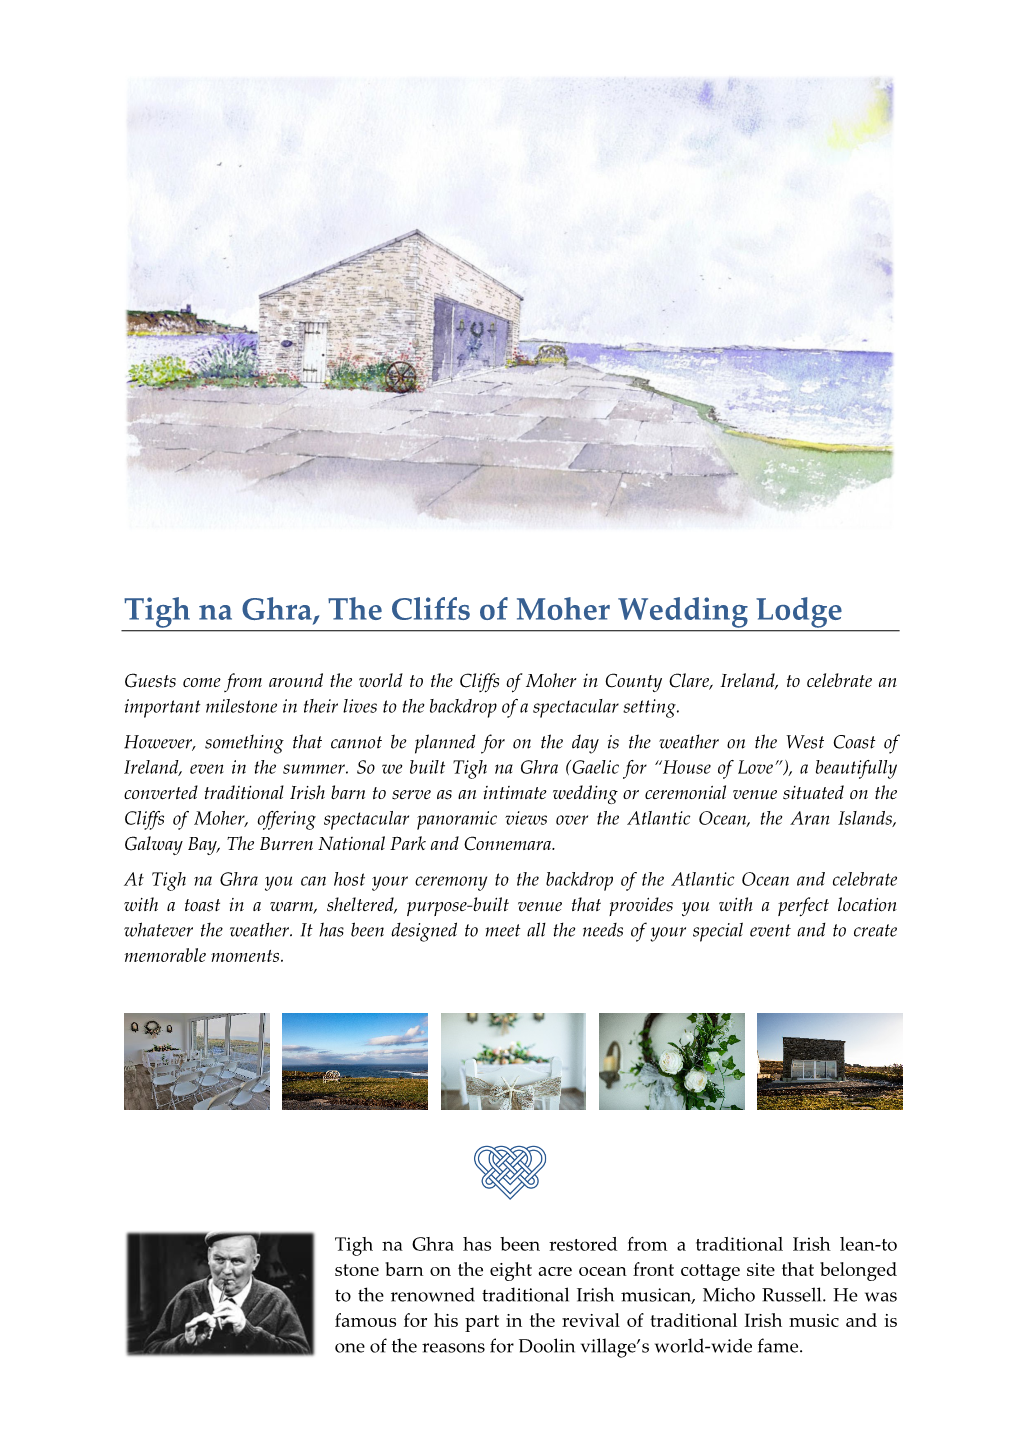 Tigh Na Ghra, the Cliffs of Moher Wedding Lodge